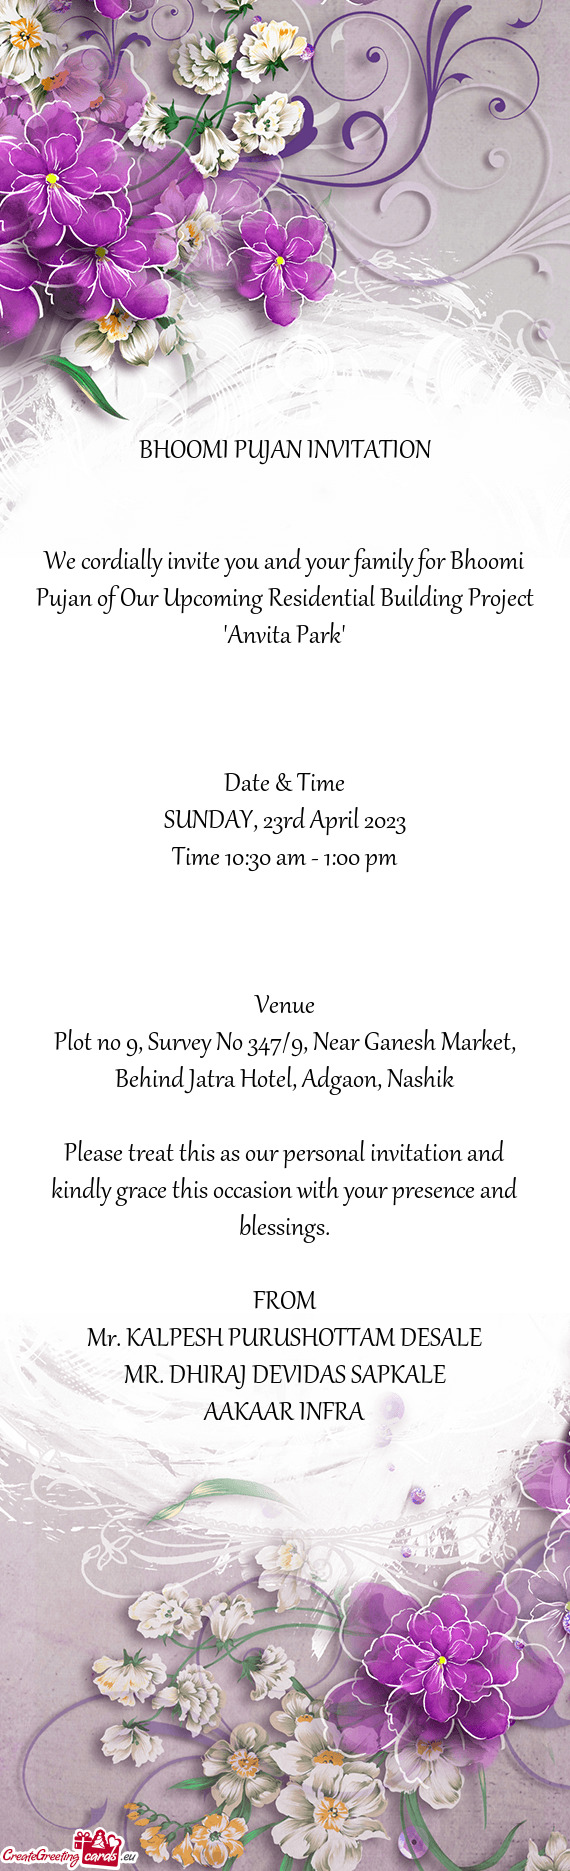 We cordially invite you and your family for Bhoomi Pujan of Our Upcoming Residential Building Projec